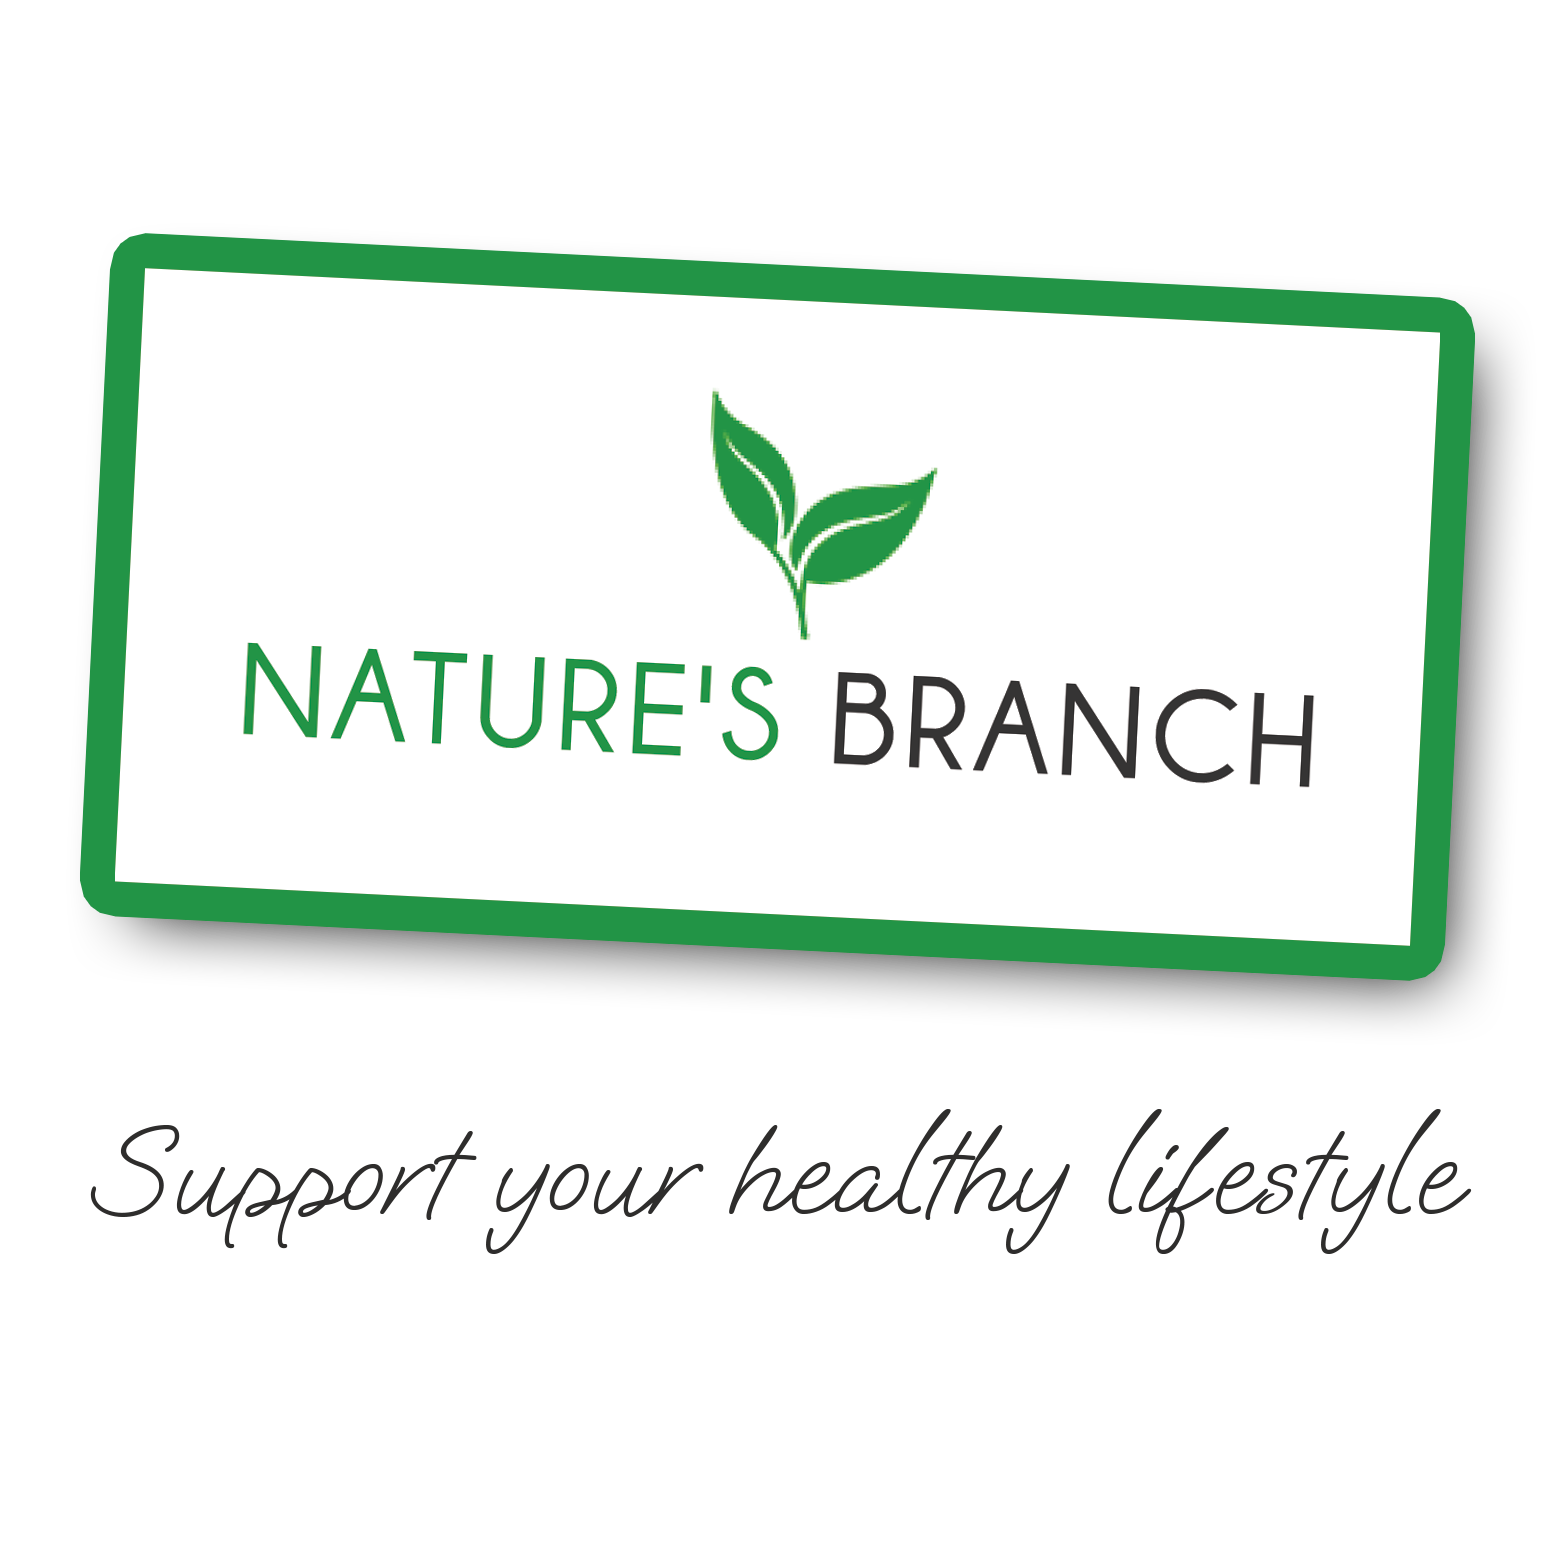 Nature's Branch nutritional supplement logo with green leaf and healthy lifestyle tag line